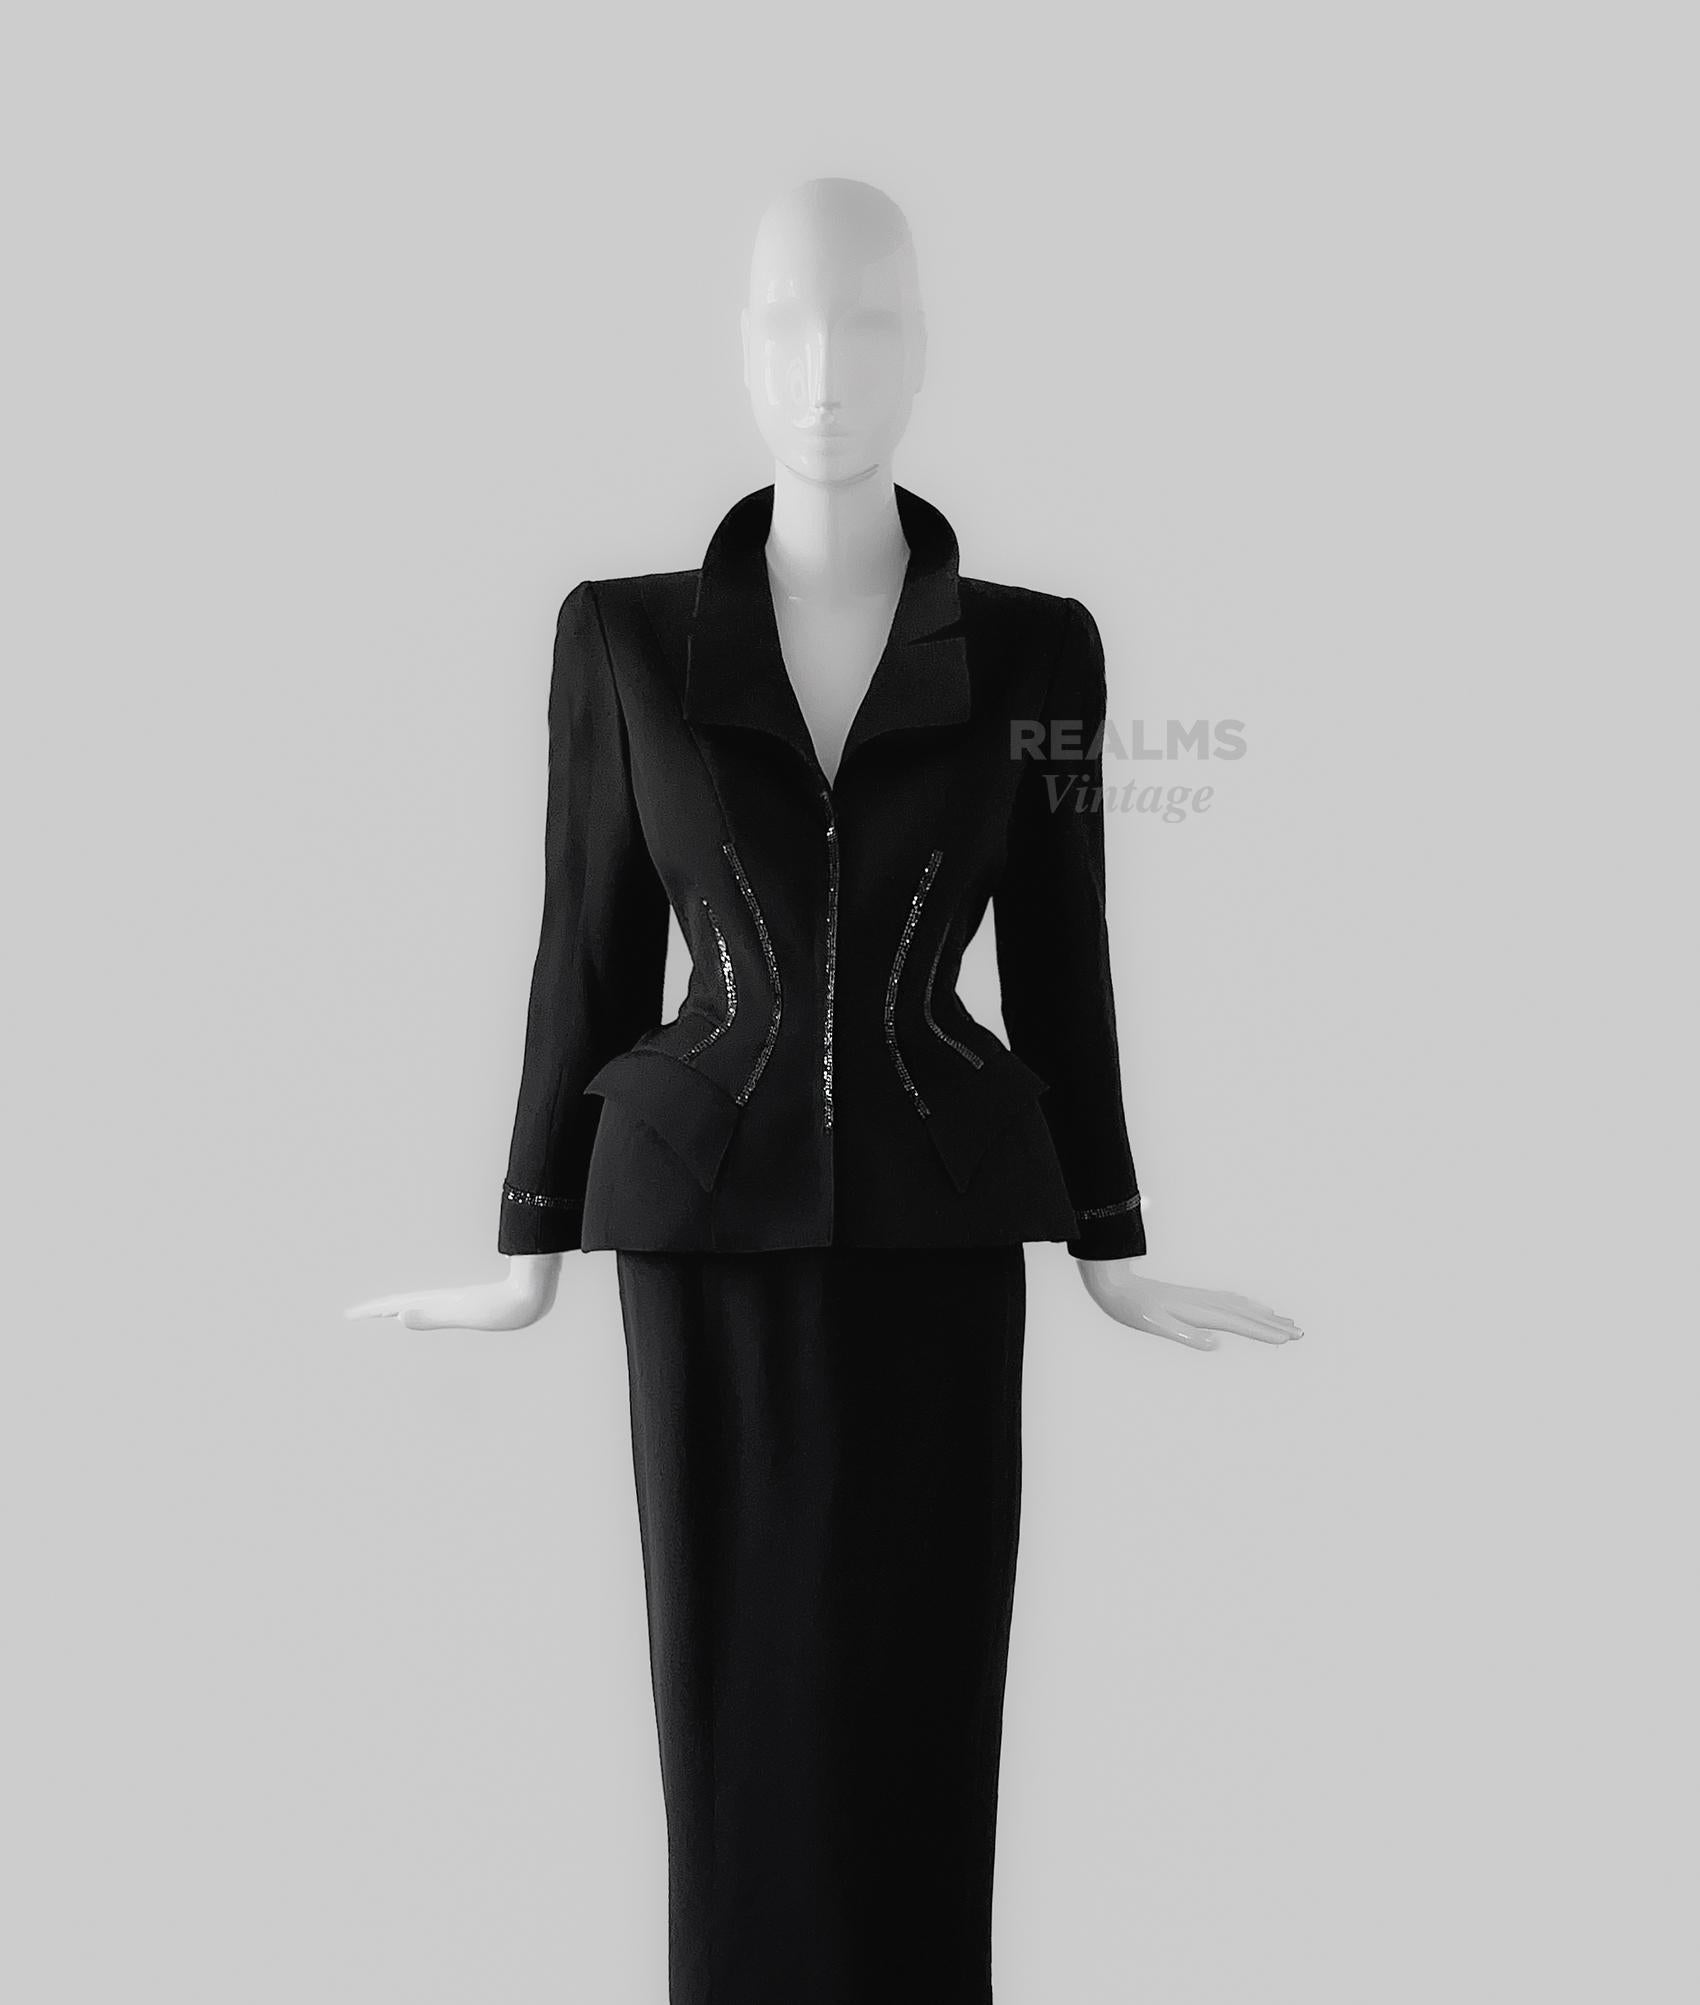 
The Iconic Thierry Mugler FW 1998 jacket famously captured by the legend Helmut Newton!
Extremely rare and documented piece, Museum Worthy. Black jacket and long black skirt ensemble.

Stunning fitted blazer jacket with crystal rhinestone details